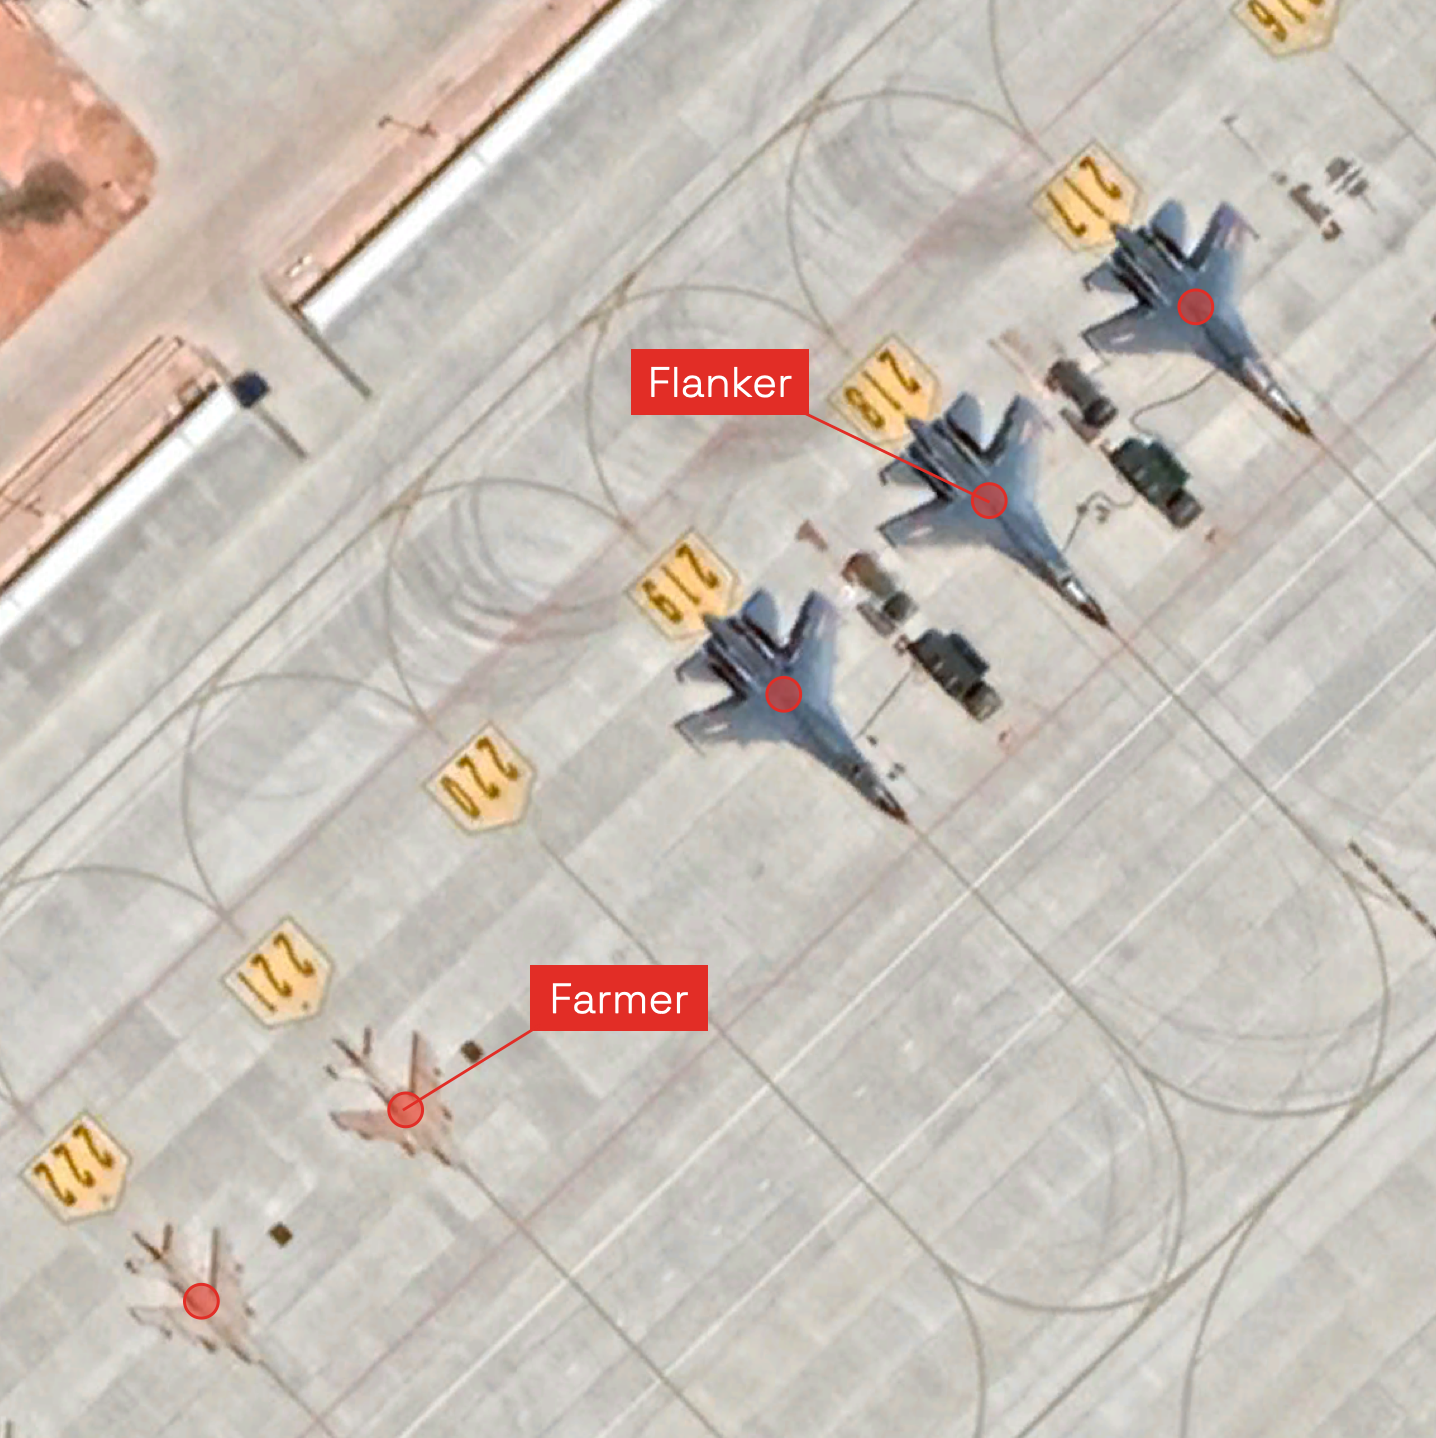 [INSIGHT] China: detecting former fighter jets turned into UAVs